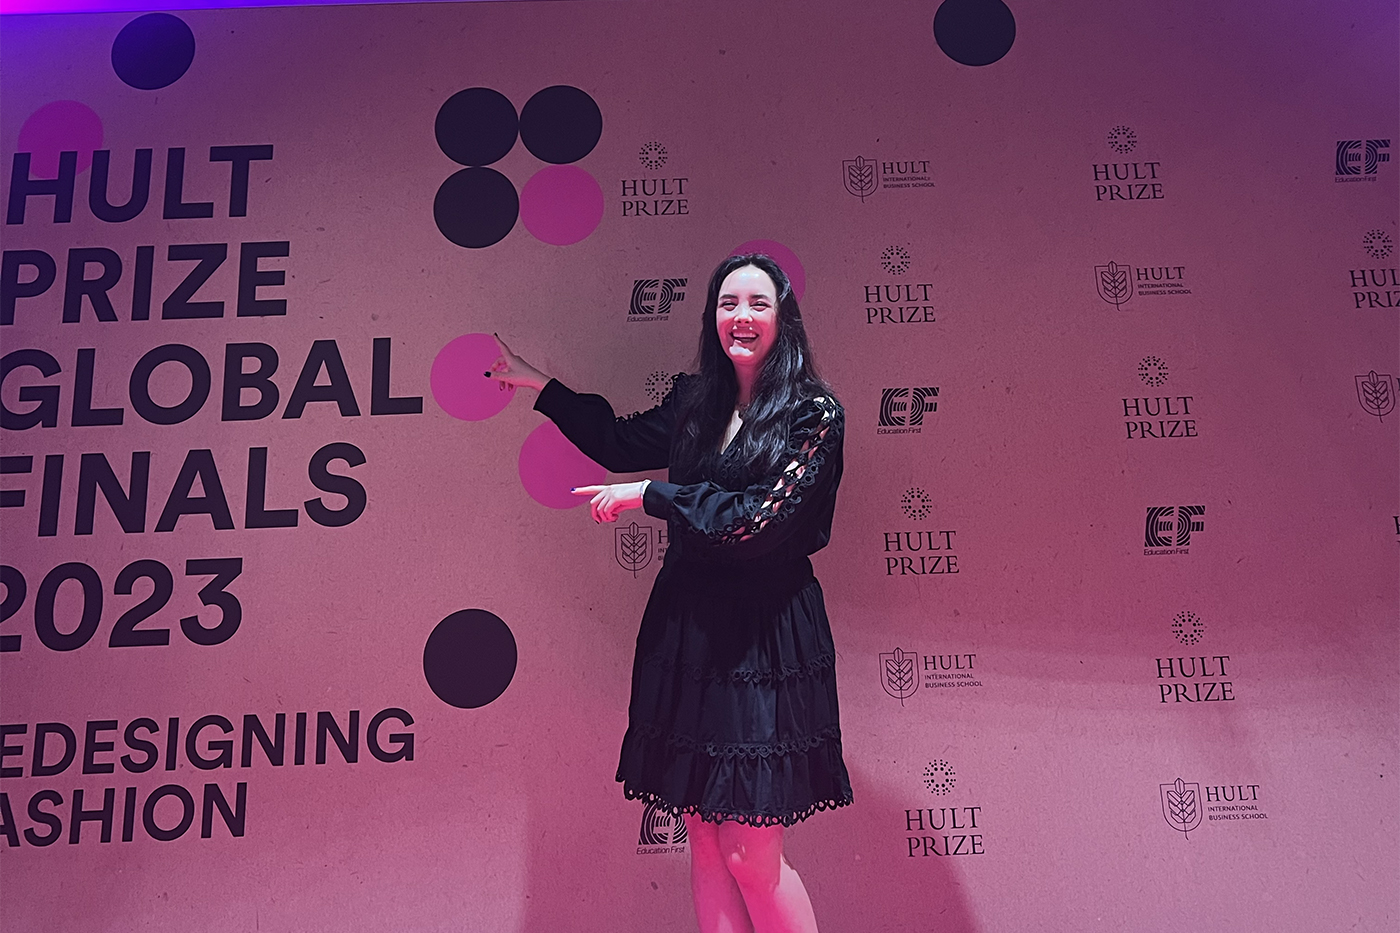 Izabella Pivo pointing to a photo background that says "Hult Prize Global Finals 2023, Redesigning Fashion".